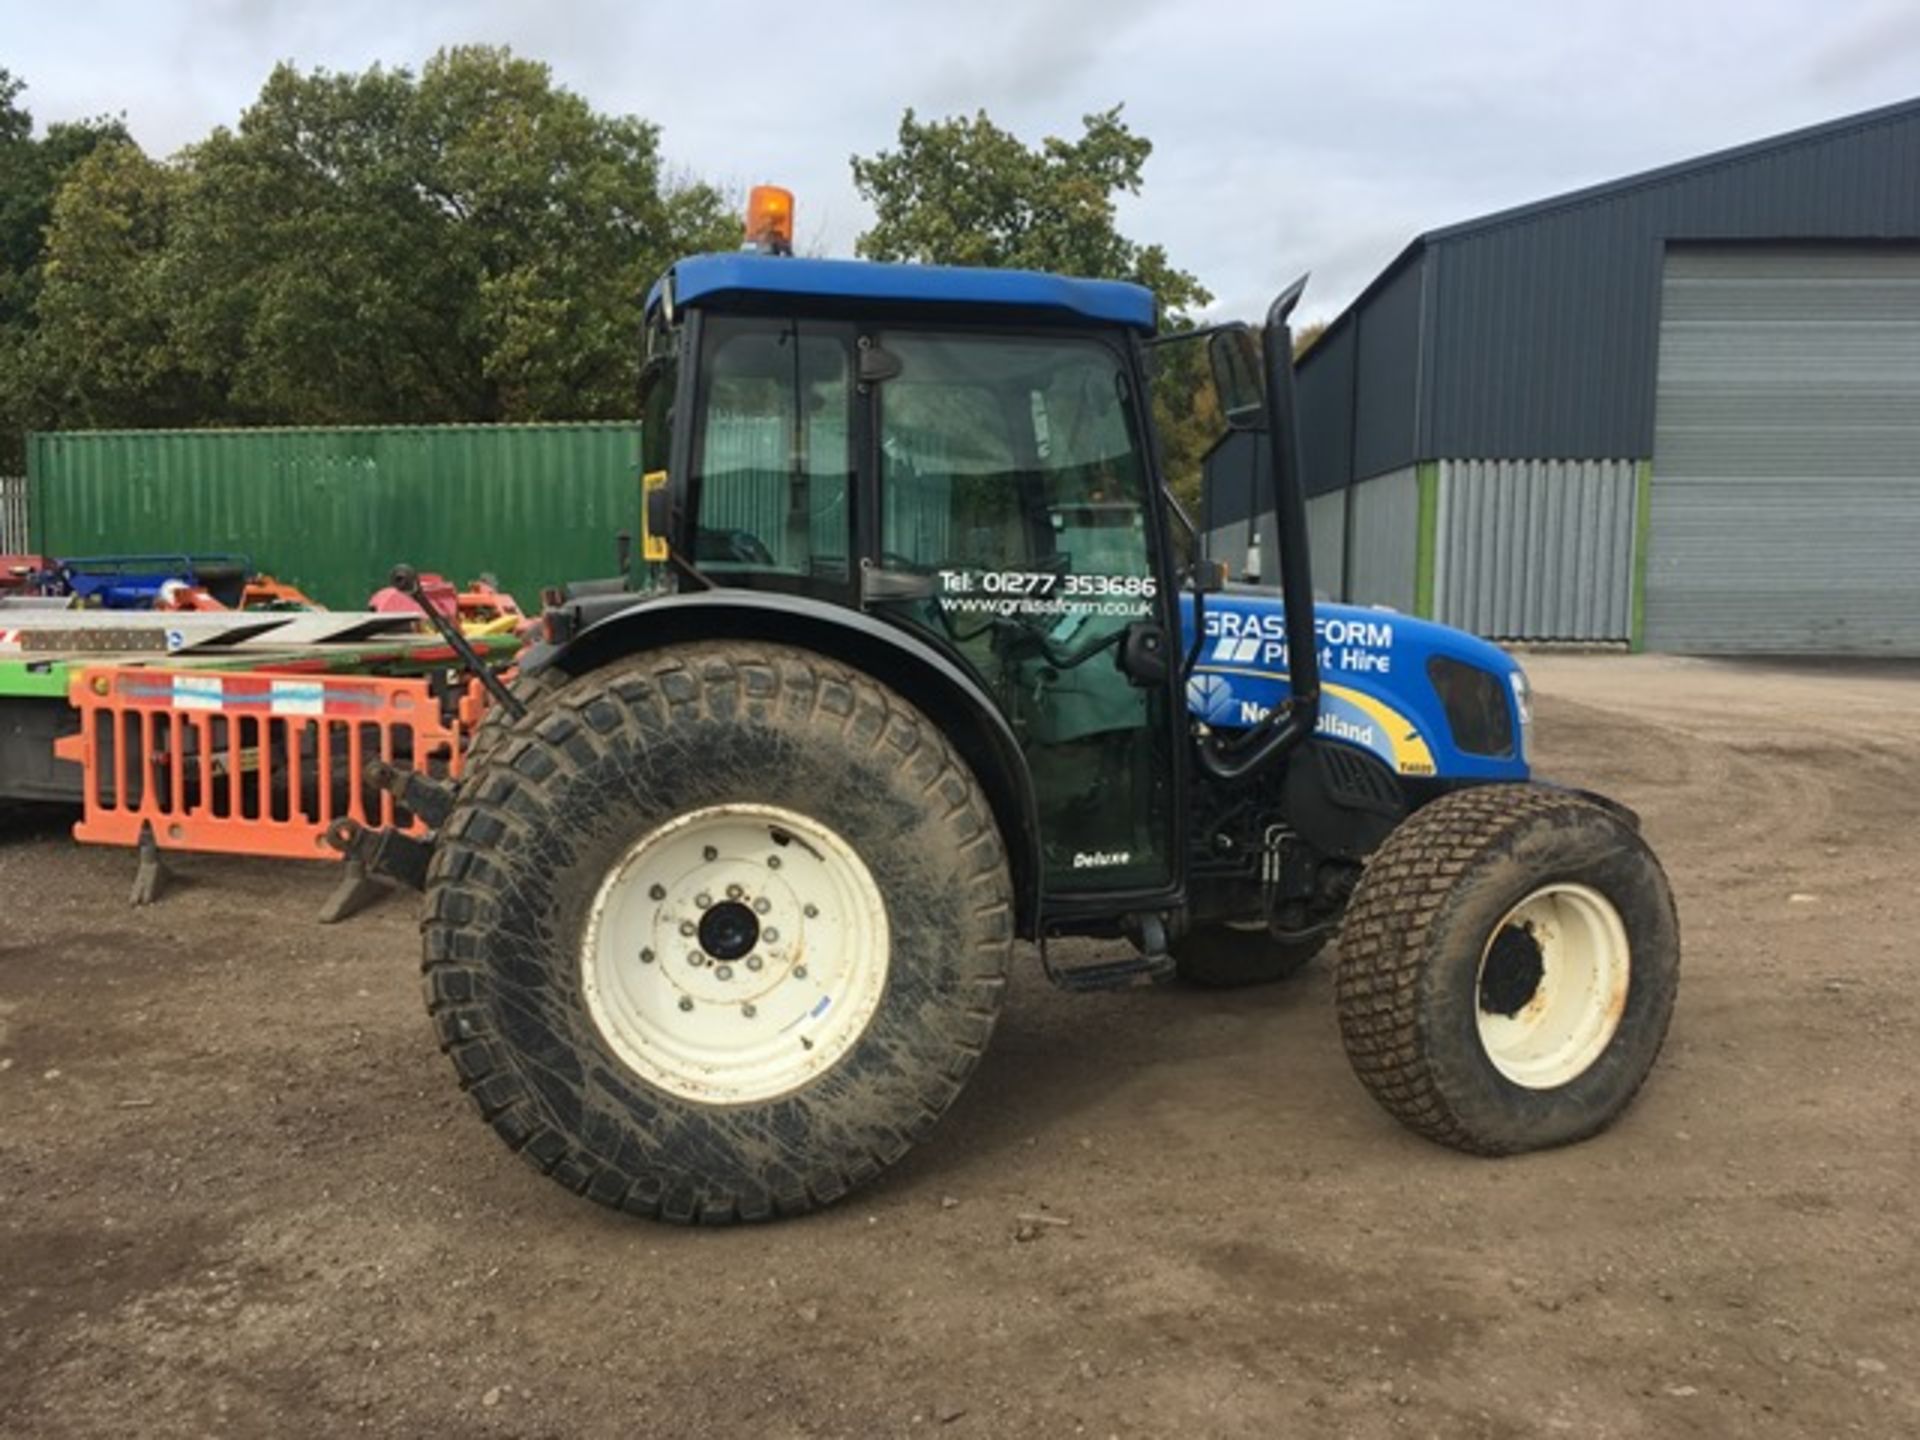 New Holland T4020 tractor fitted with grassland tyres, creep speed gear box, 2 no. exterior - Image 6 of 11